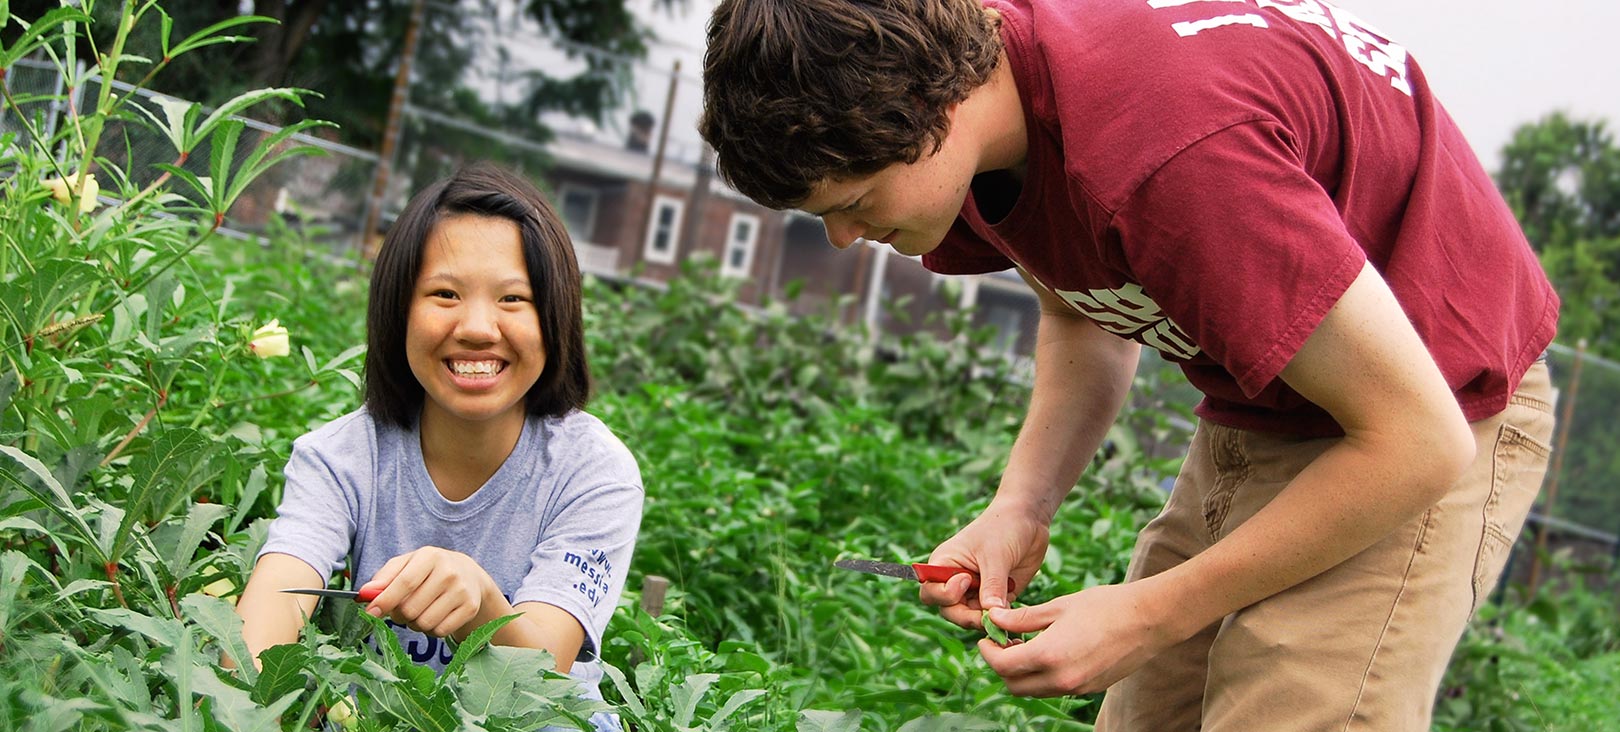 Ecological Biology Concentration Students working on a garden.jpg